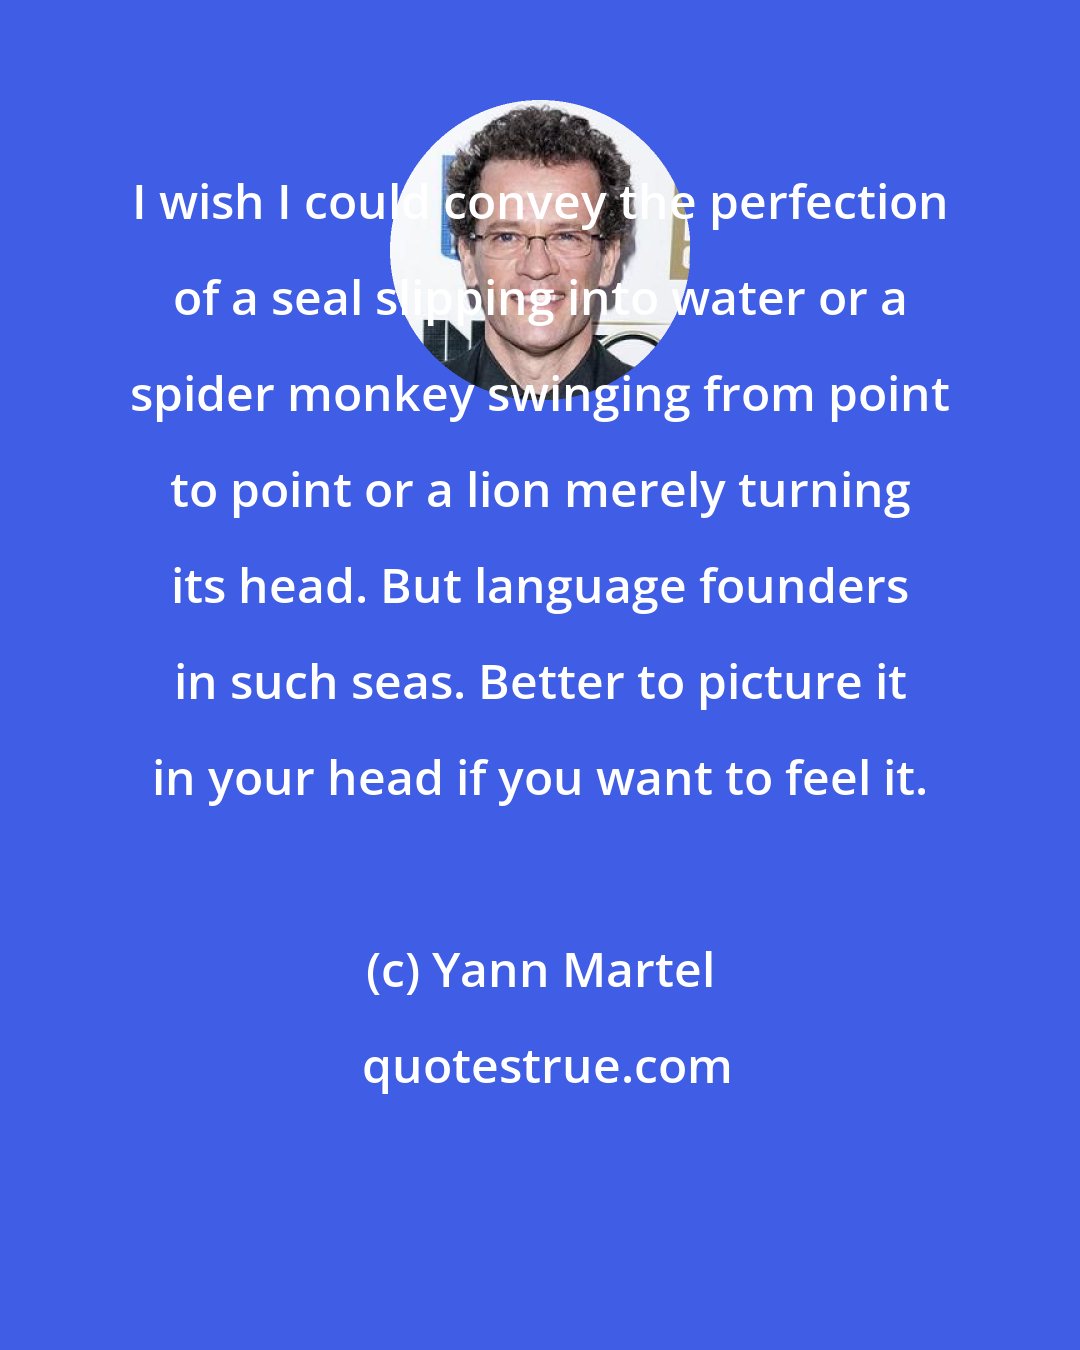 Yann Martel: I wish I could convey the perfection of a seal slipping into water or a spider monkey swinging from point to point or a lion merely turning its head. But language founders in such seas. Better to picture it in your head if you want to feel it.